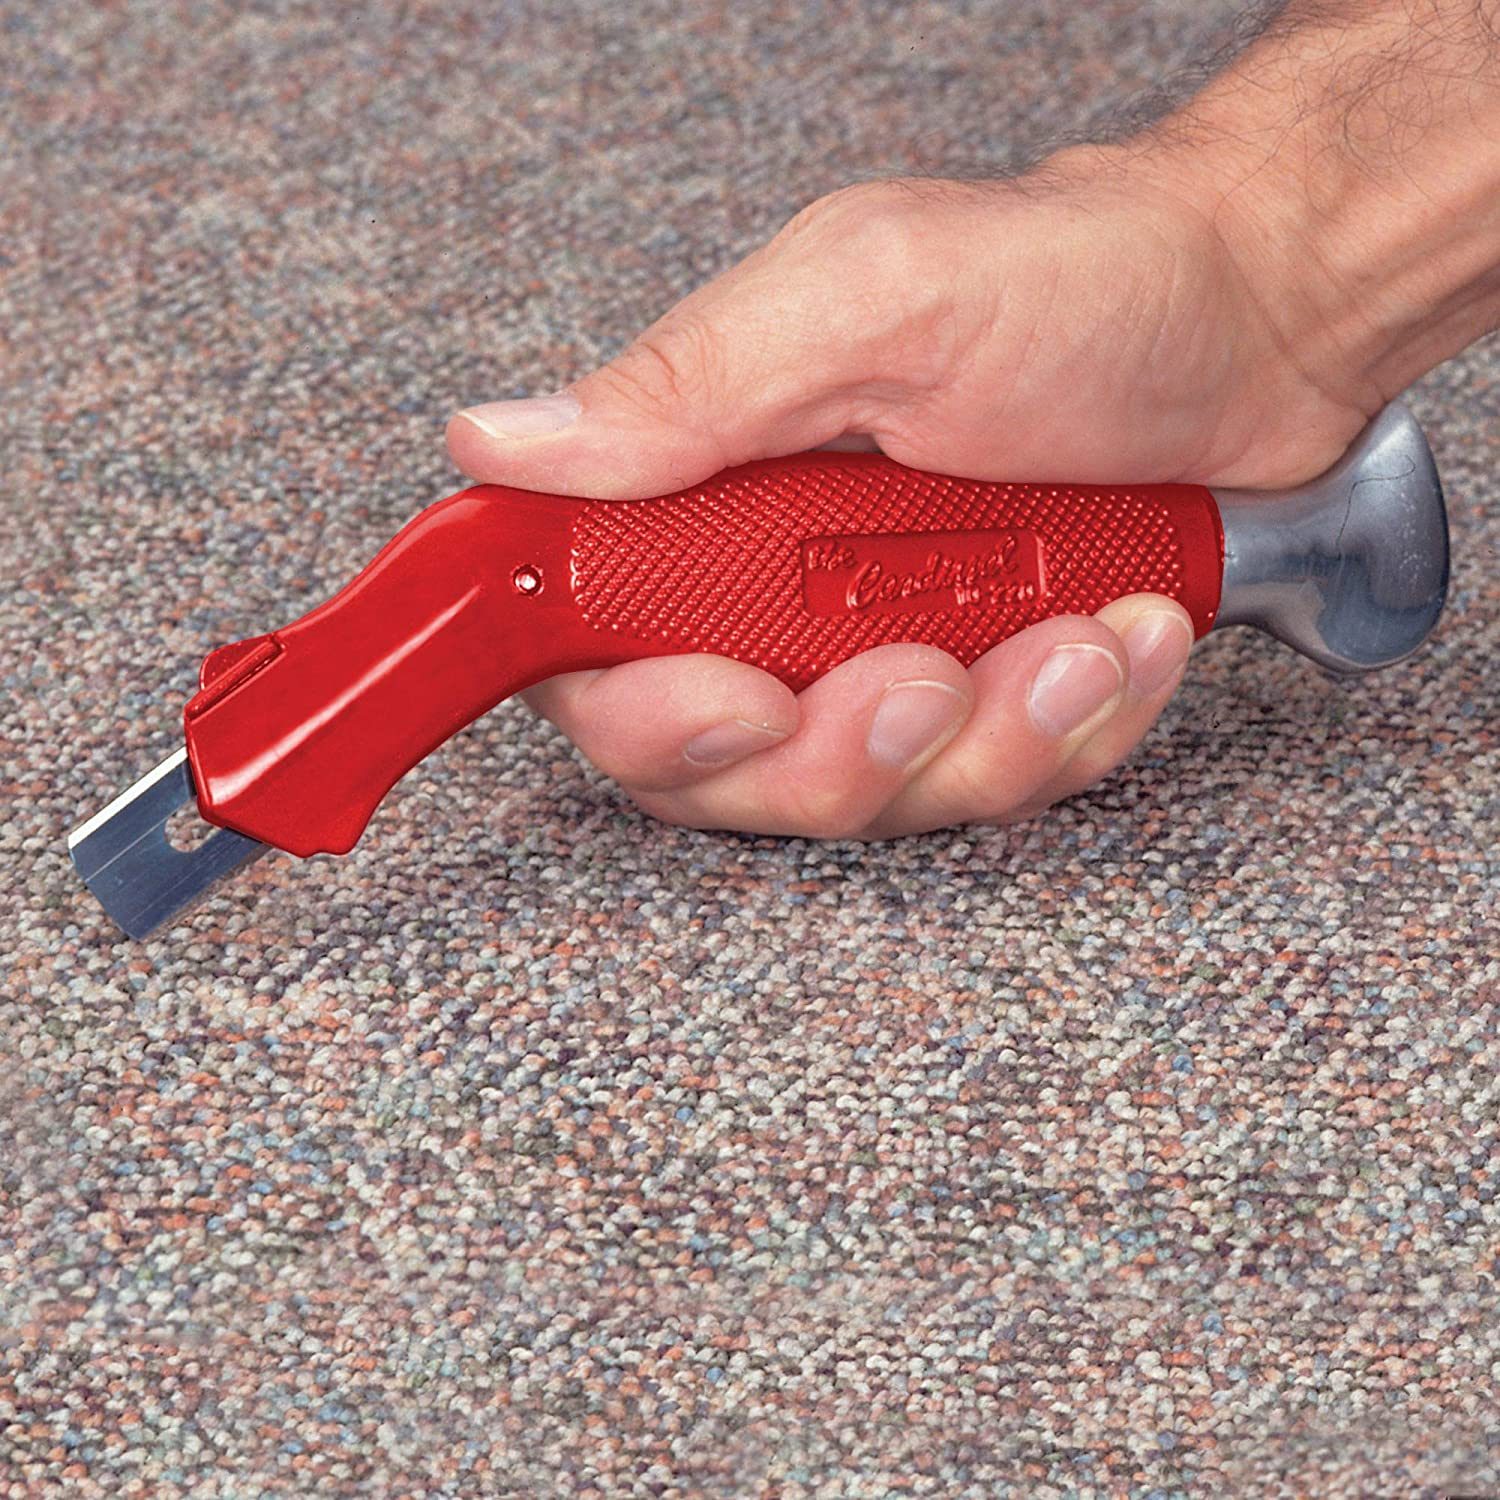 What's the best tool for cutting old carpet where the concern is only  power, not precision? - Quora